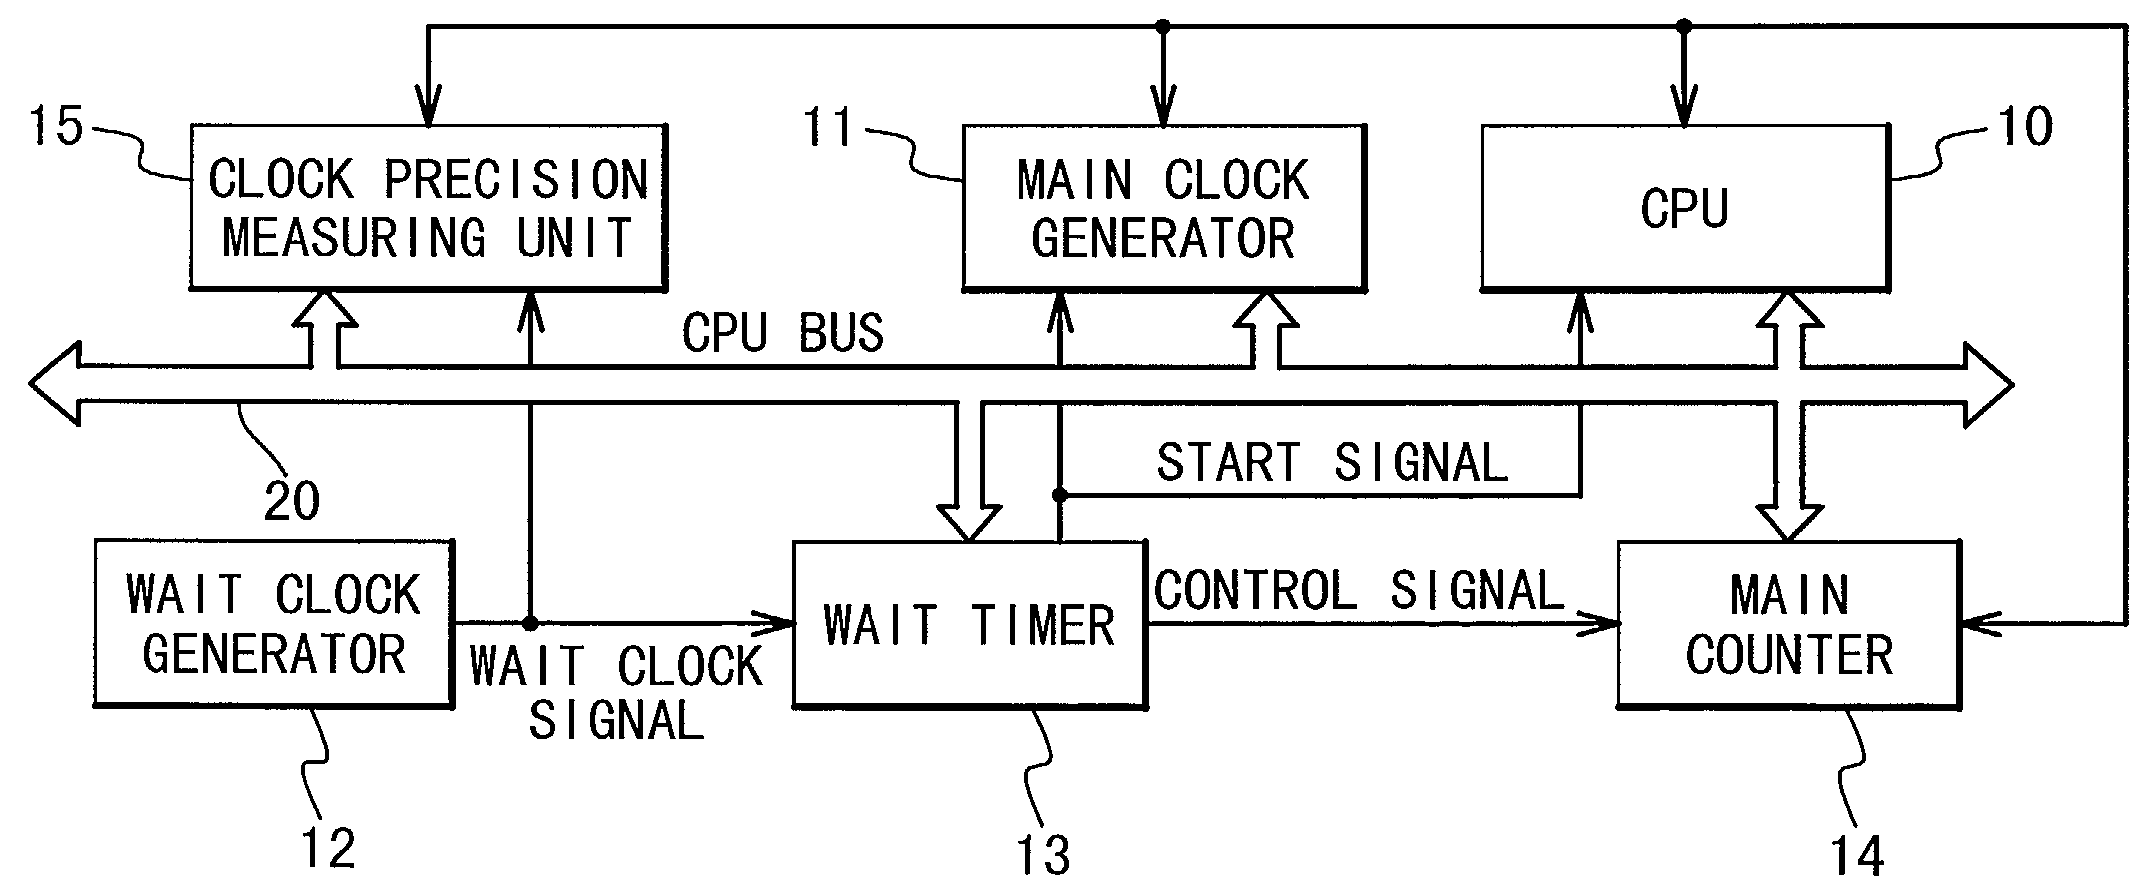 Mobile phone capable of stopping main clock signal